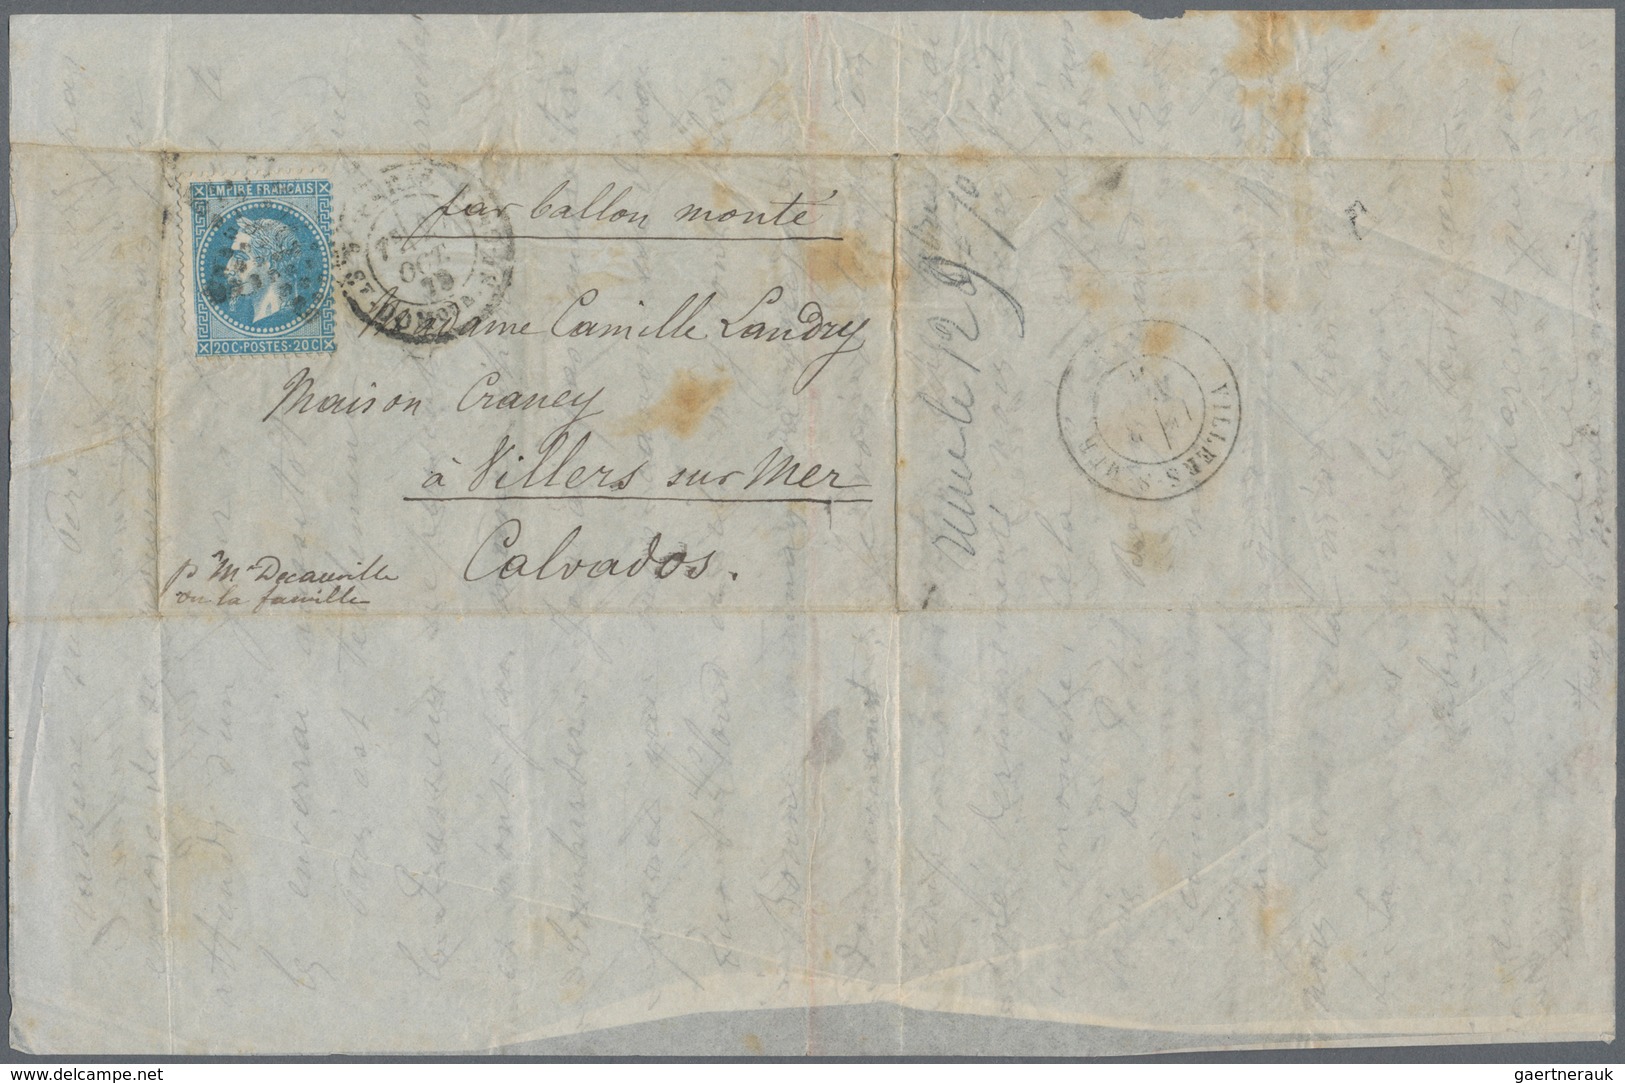 Frankreich - Ballonpost: 1870-71 BALLON MONTÉ: Correspondence of 24 letters and postcards all from P